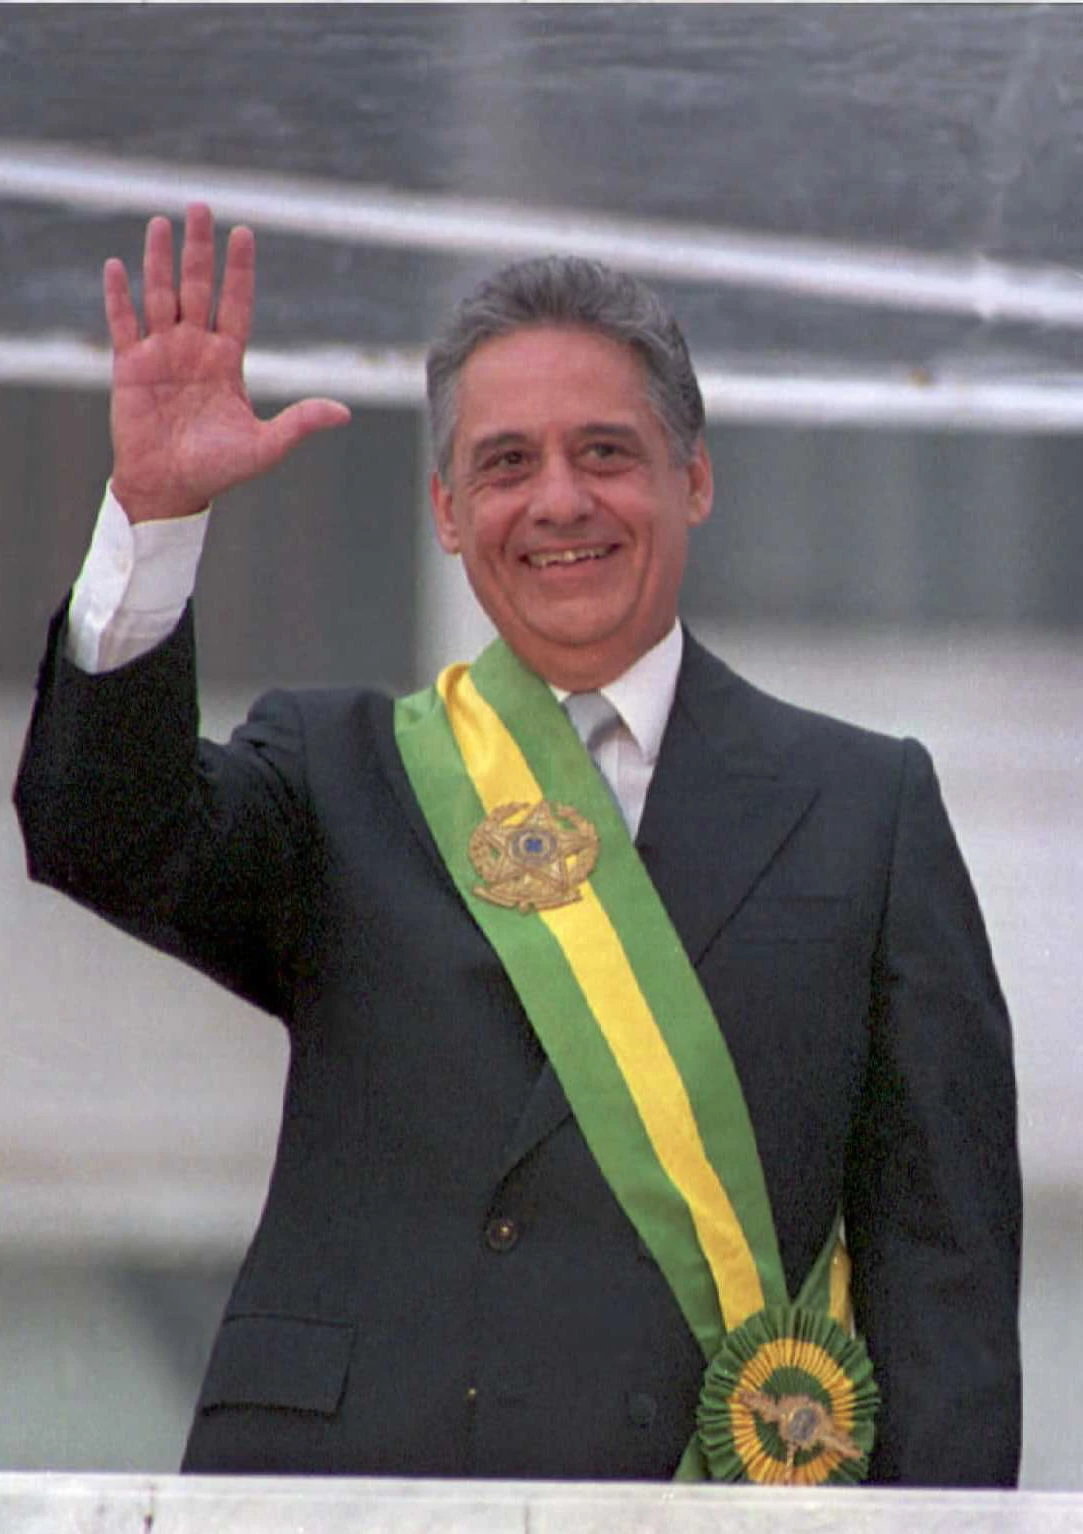 JANUARY 1:  Brazilian President Fernando Henrique Cardoso waves from the Planalto Palace in Brasilia after receiving the presidential sash from his predecessor Itamar Franco 01 January. Cardoso was elected 03 October with 54 million votes. (COLOR KEY: Green and yellow sash).  (Photo credit should read ANTONIO SCORZA/AFP/Getty Images)